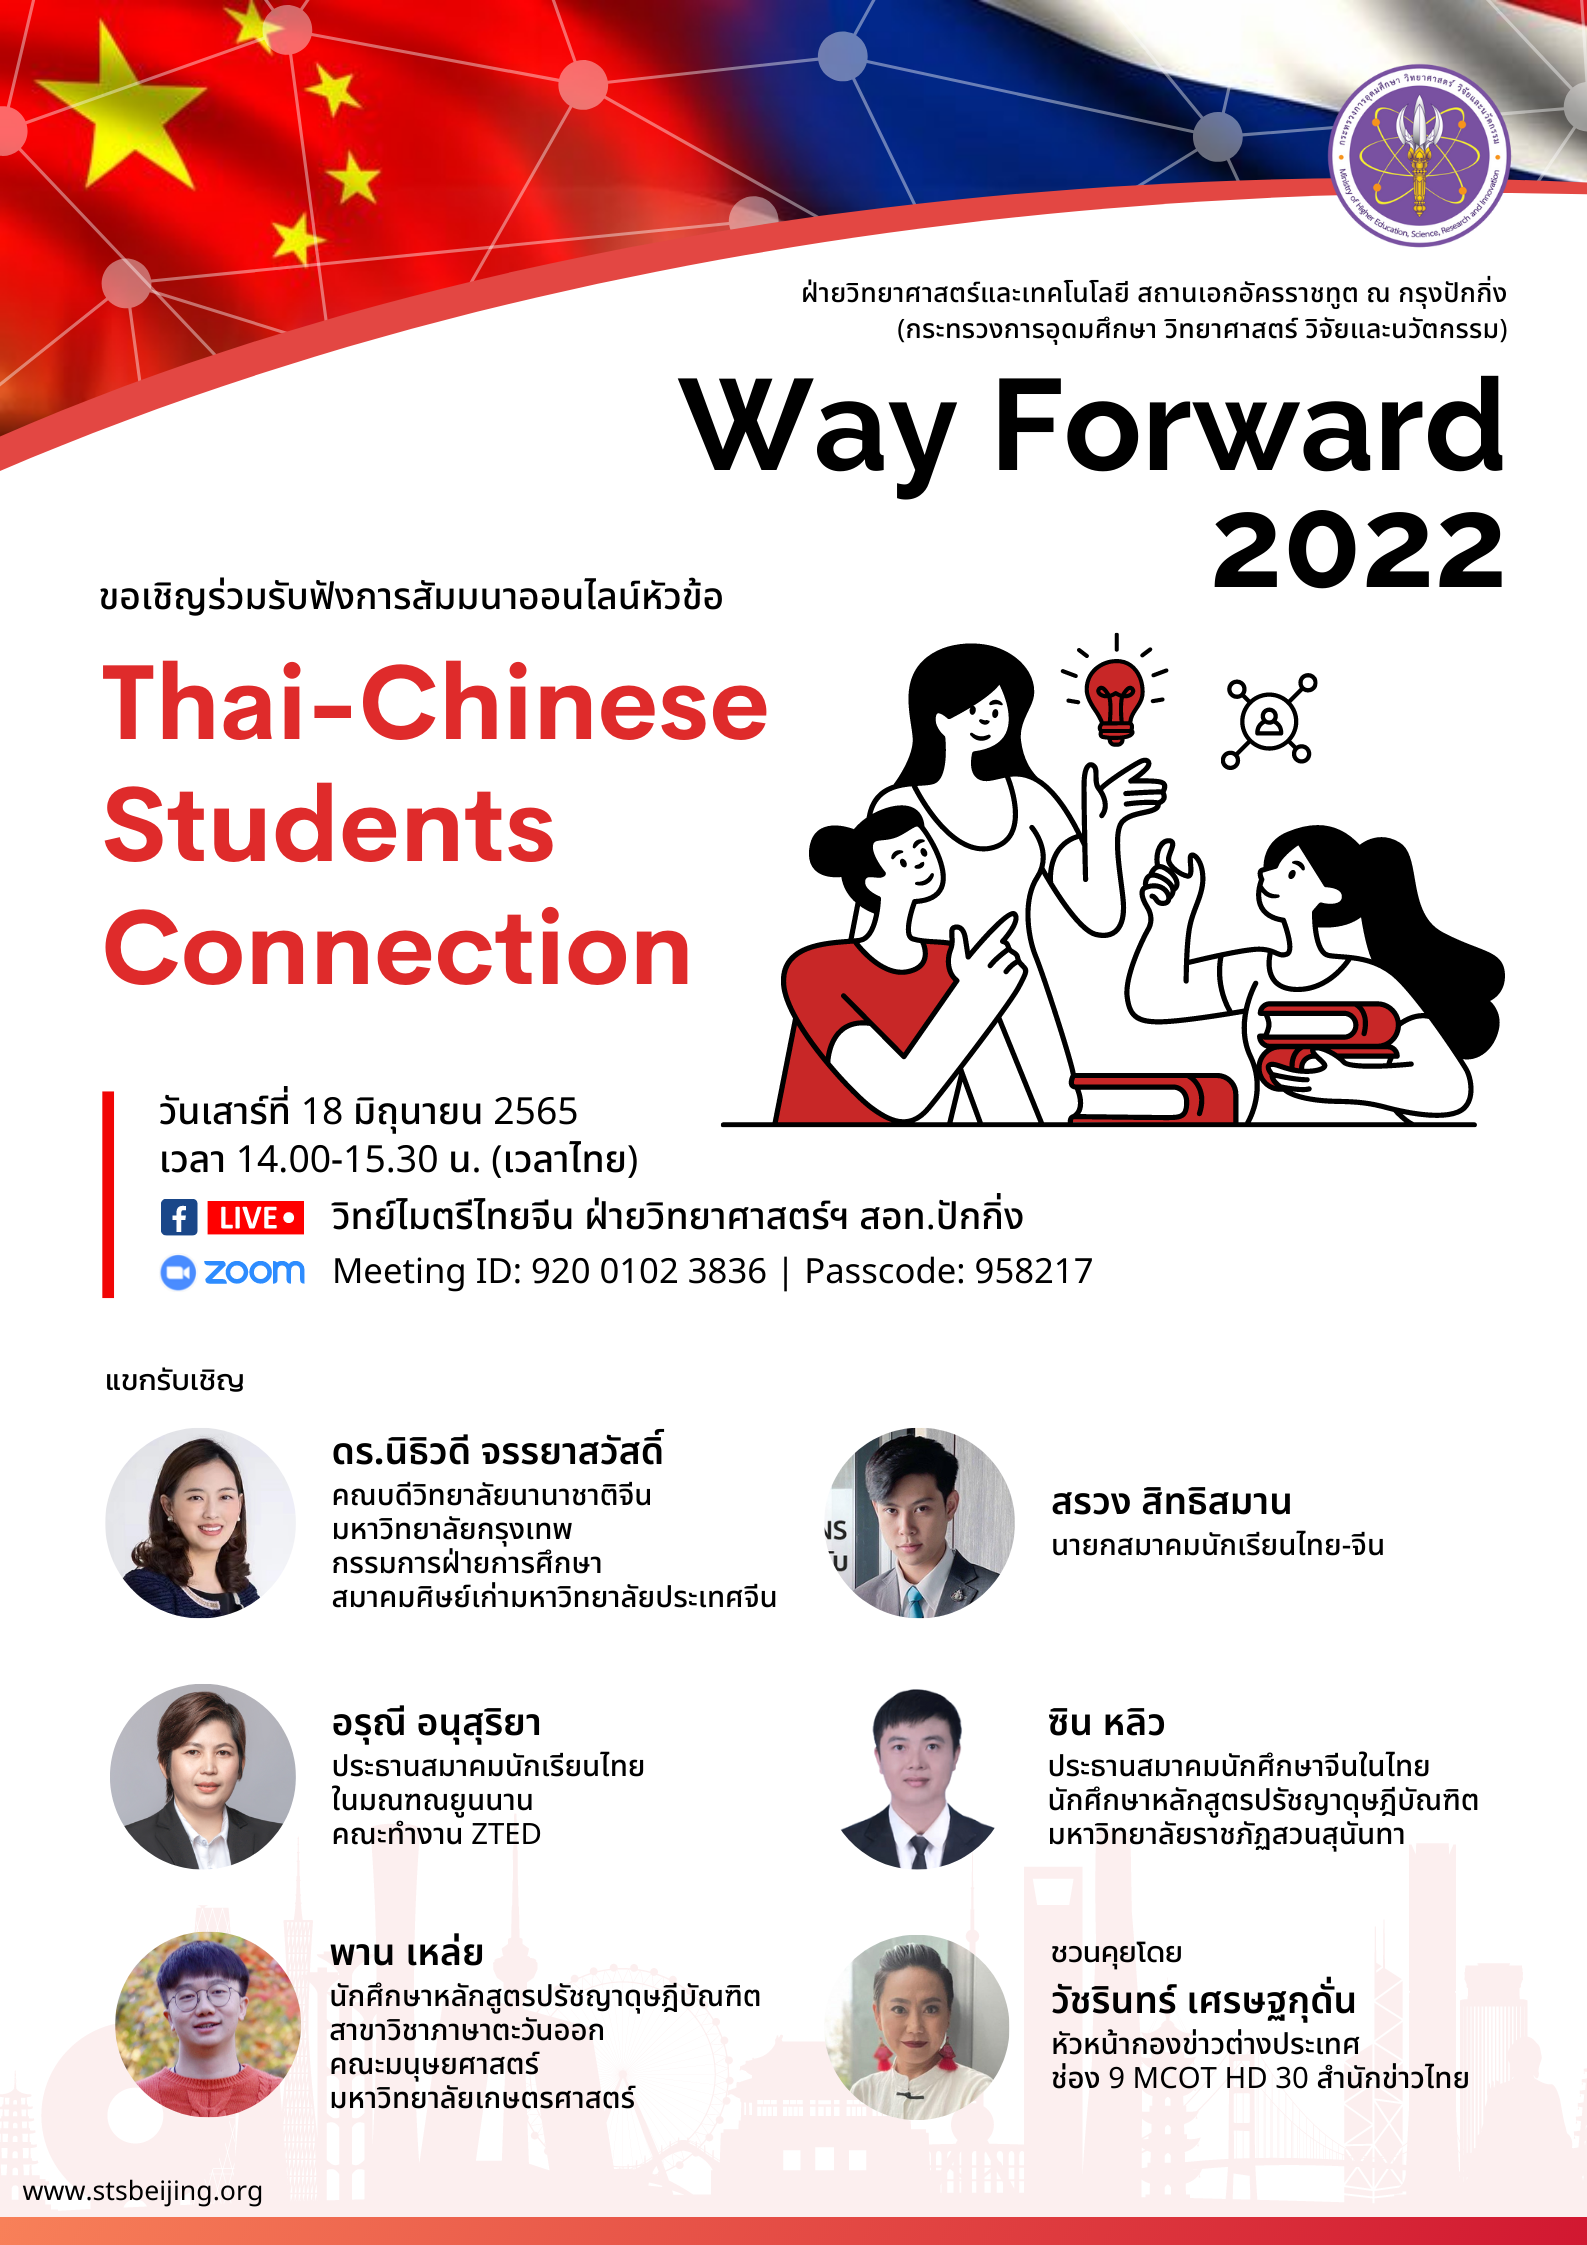 Way Forward 2022 “Thai-Chinese Students Connection”